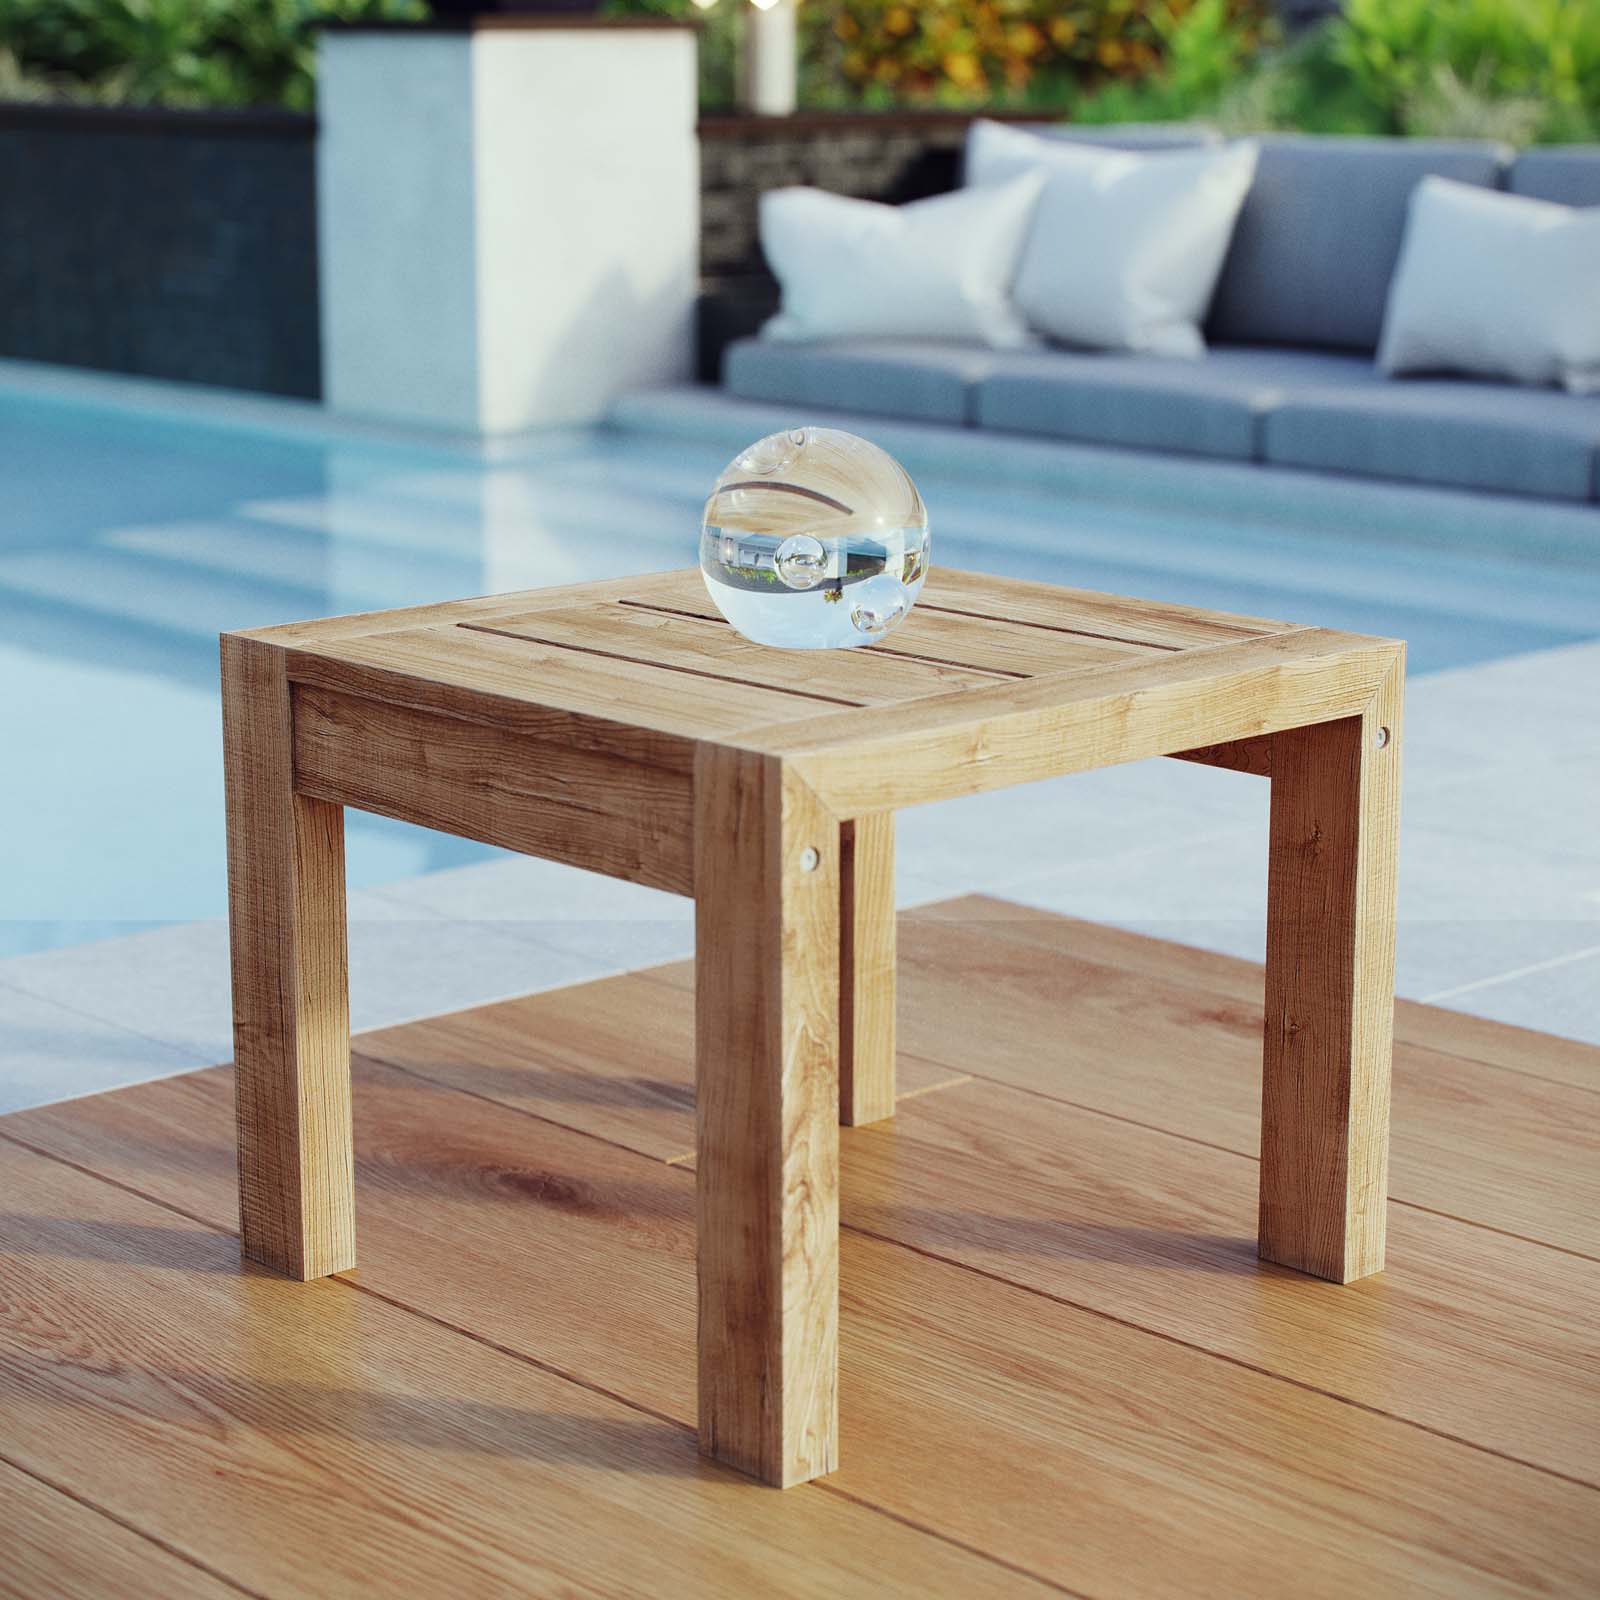 The Best Outdoor Side Tables Hold Snacks and a Good Book Without Overcrowding Your Setup